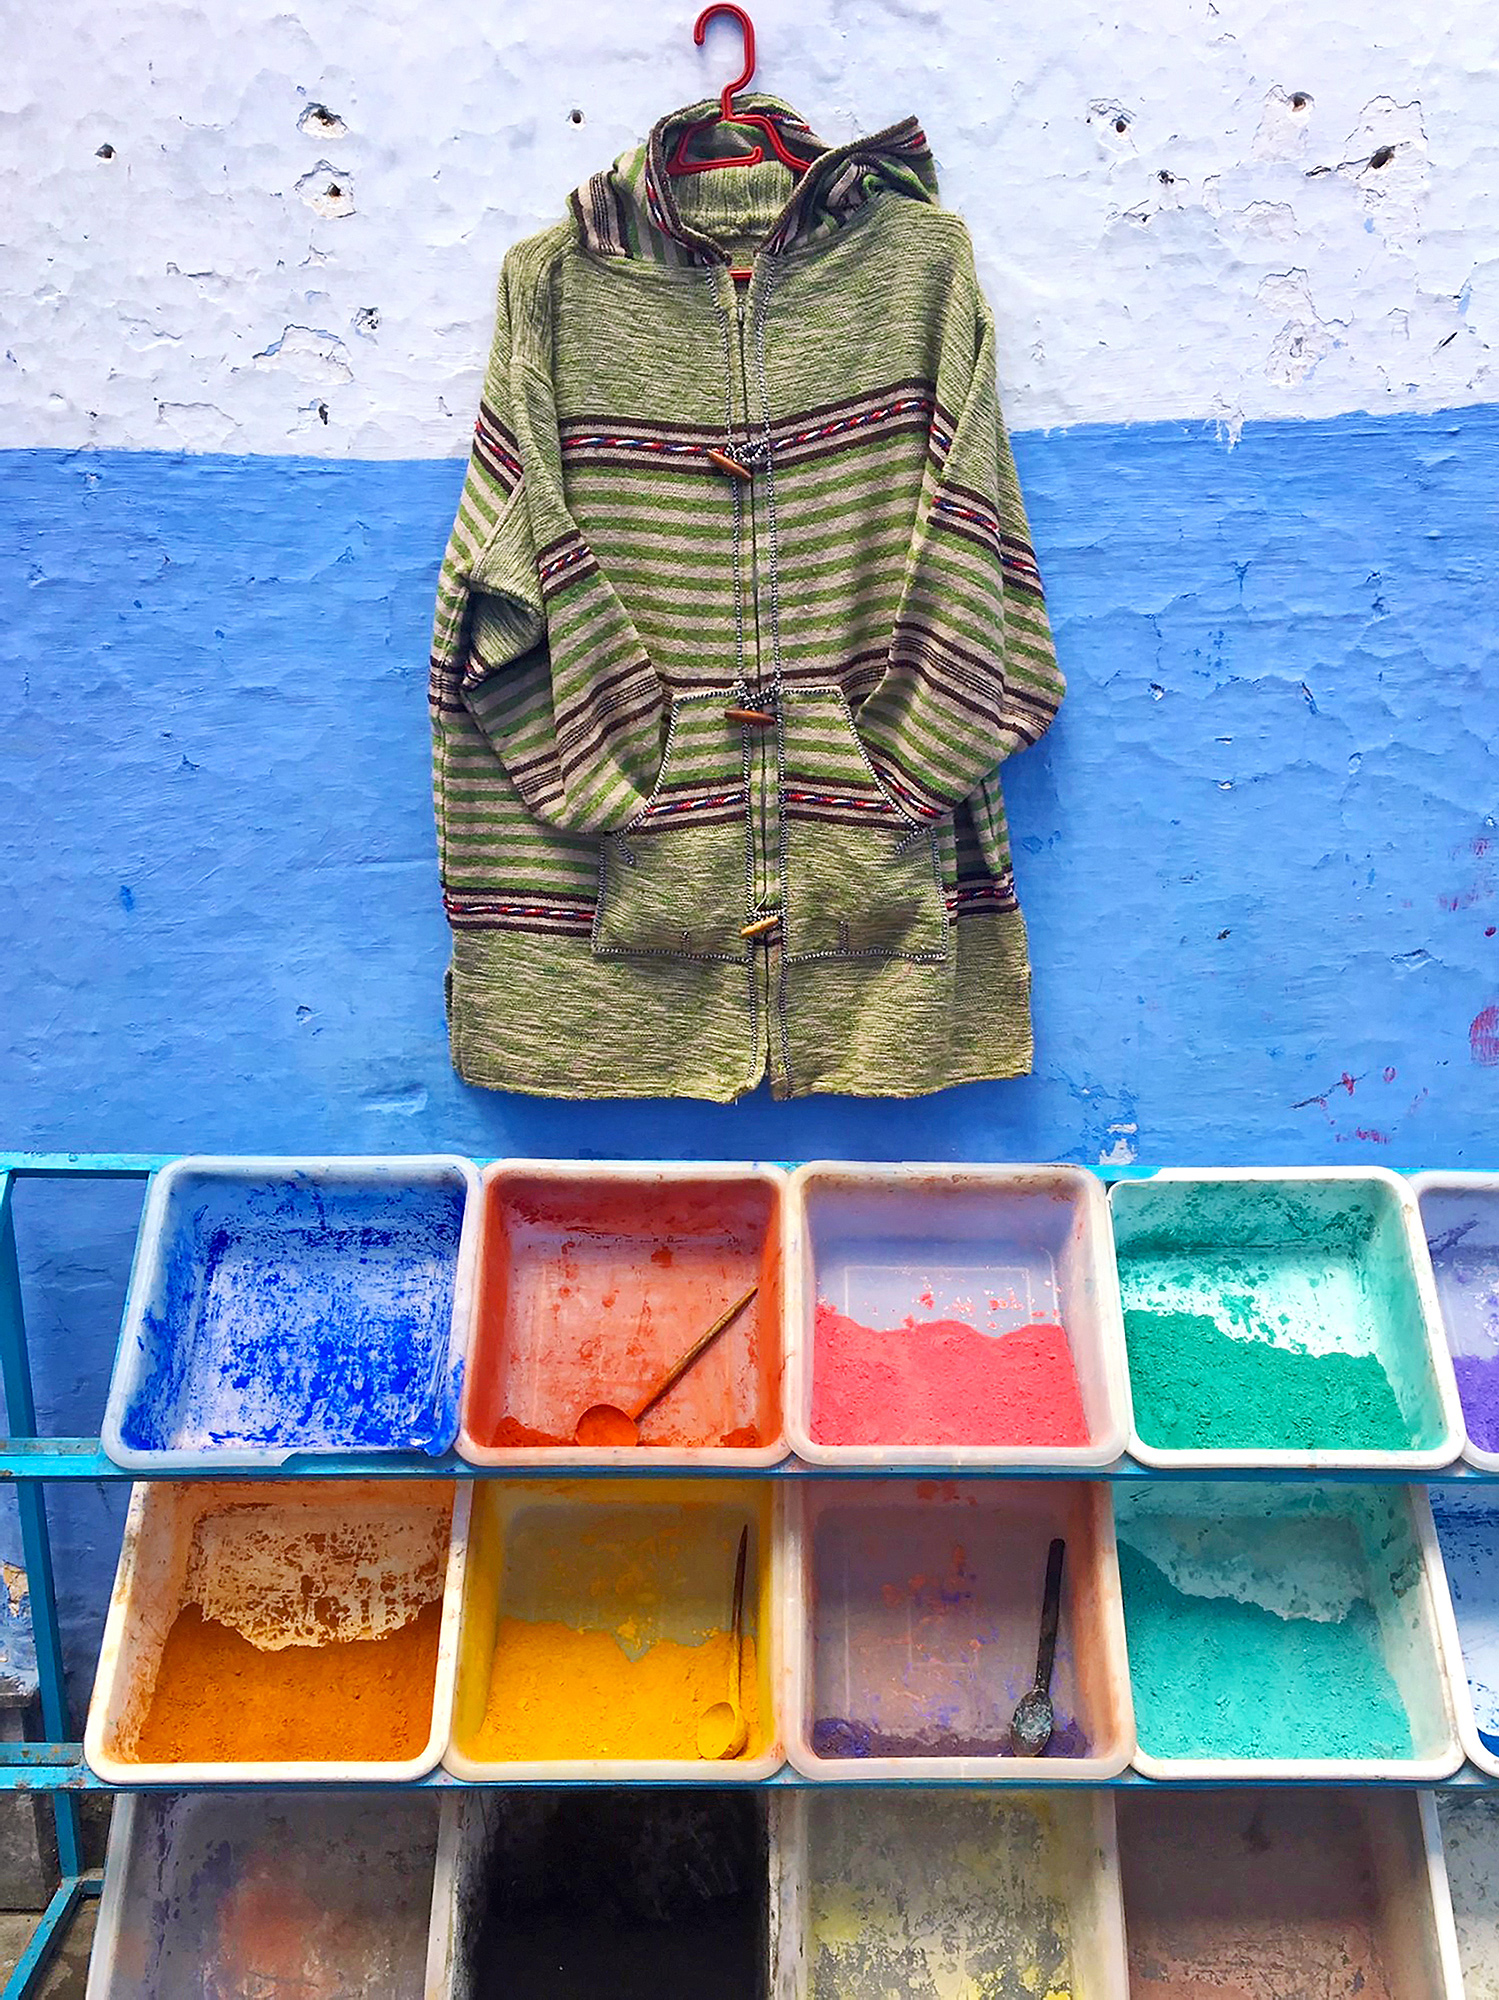 a zippered hooded jacket hangs on a wall painted white and blue above open bins of colored pigment